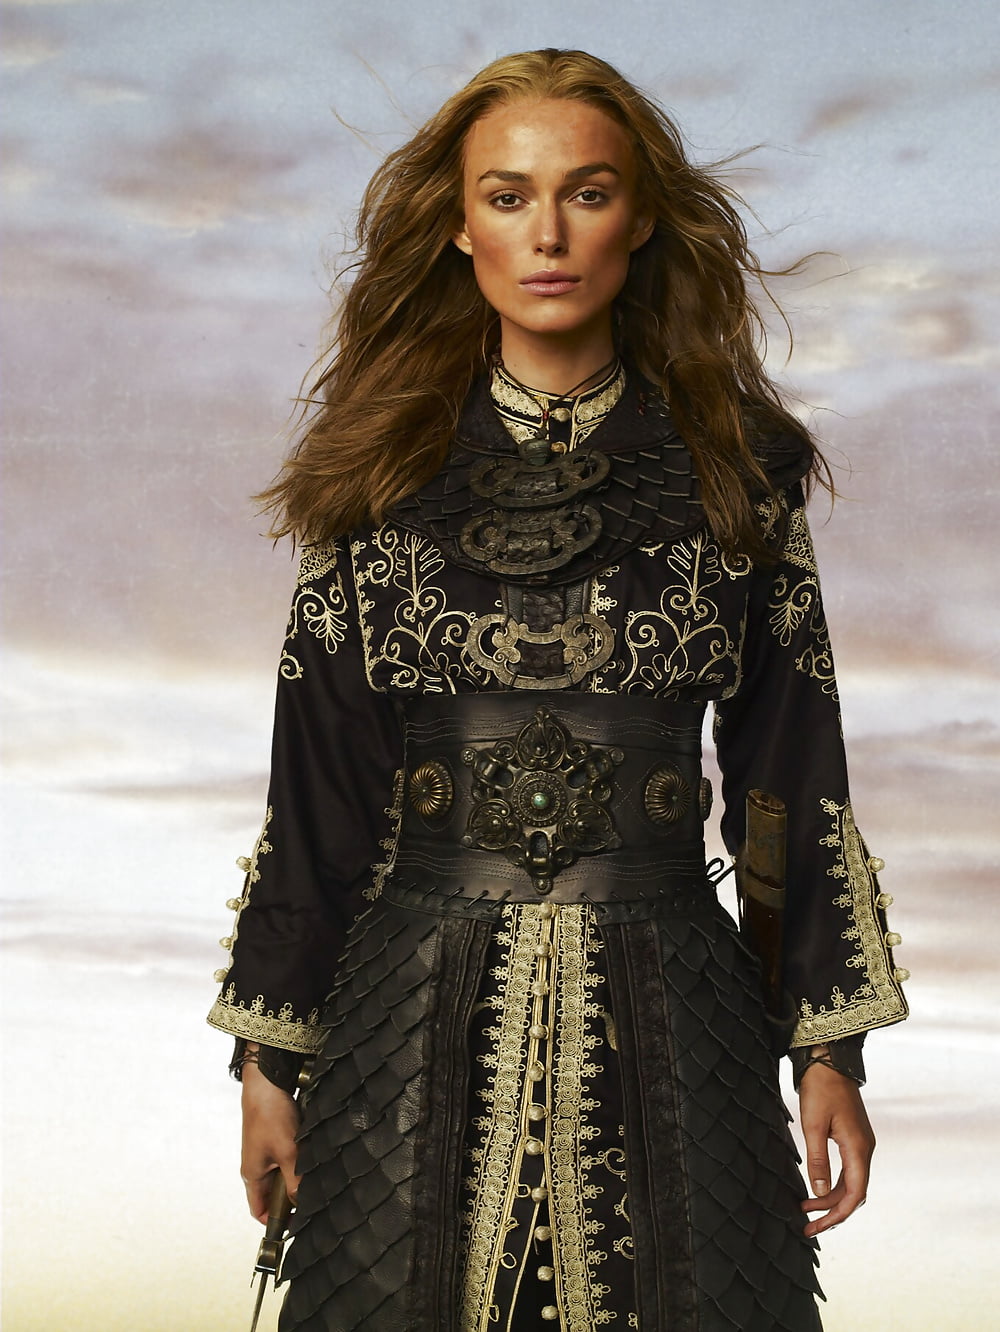 Keira_Knightley_POTC_At_Worlds_End_promoshoot_2007 (4/26)